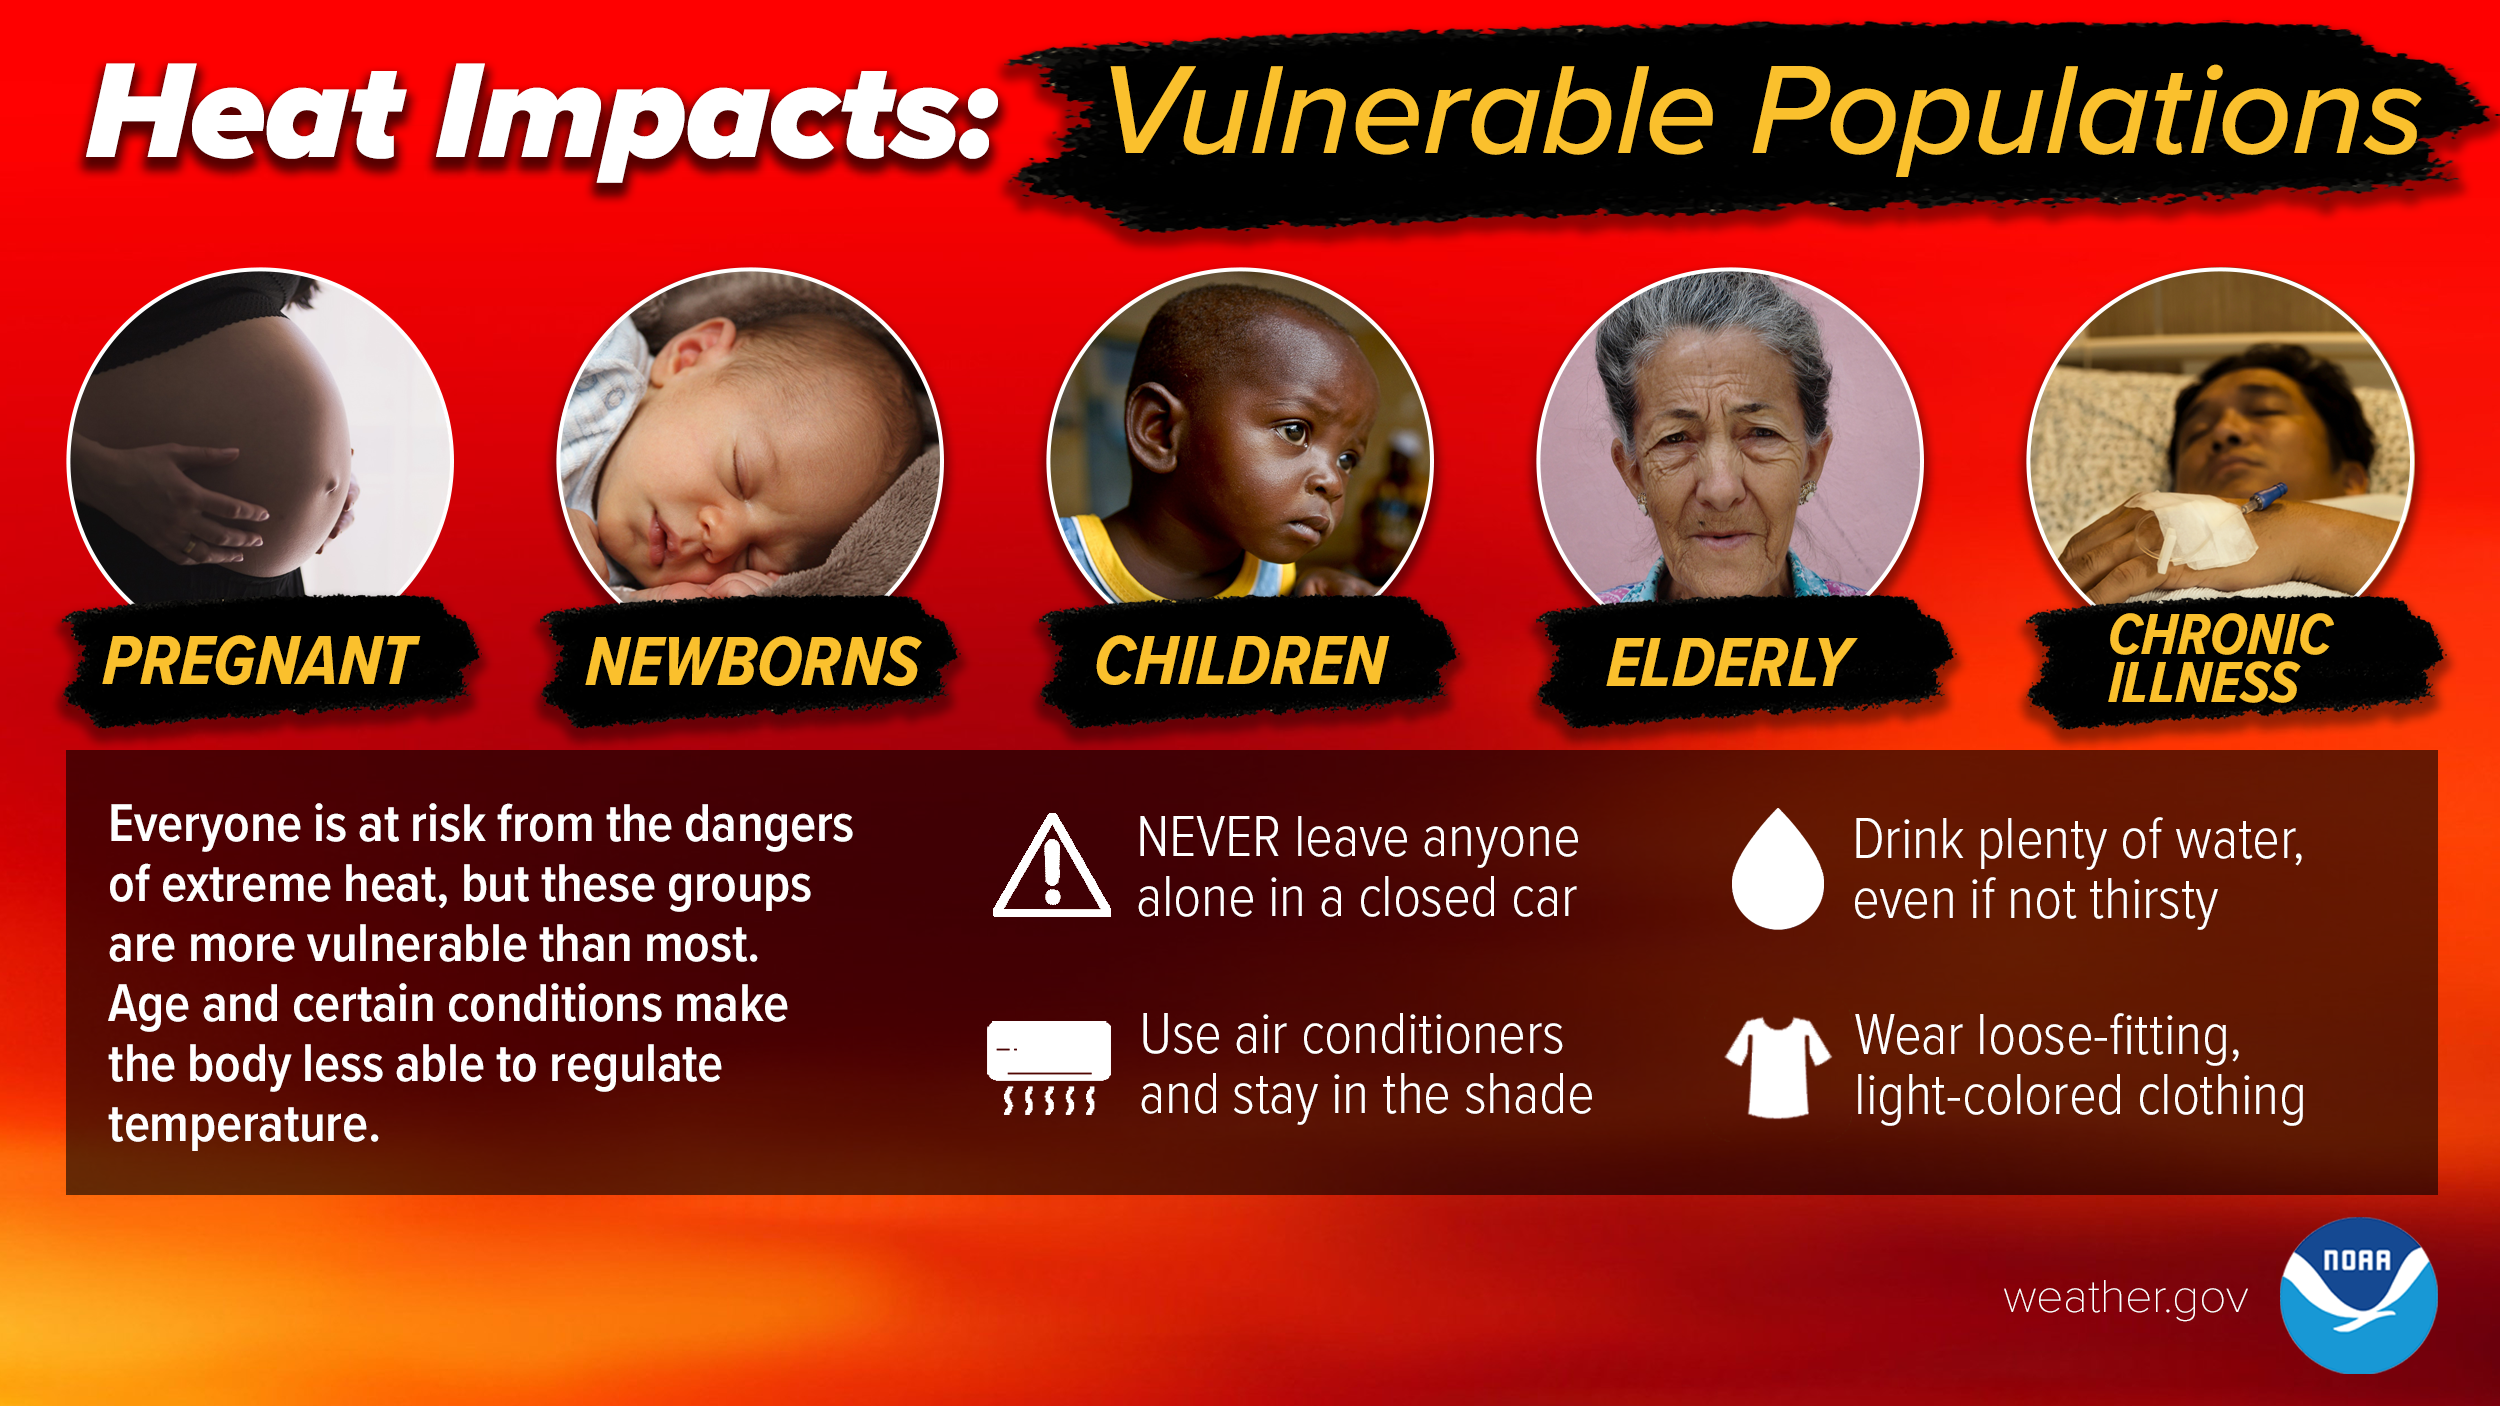 Everyone is at risk from the dangers of extreme heat, but these groups are more vulnerable than most: pregnant, newborns, children, elderly, chronic illness. Age and certain conditions make the body less able to regulate temperature. Never leave anyone alone in a closed car. Drink plenty of water, even if not thirsty. Use air conditioners and stay in the shade. Wear loose-fitting, light-colored clothing. 